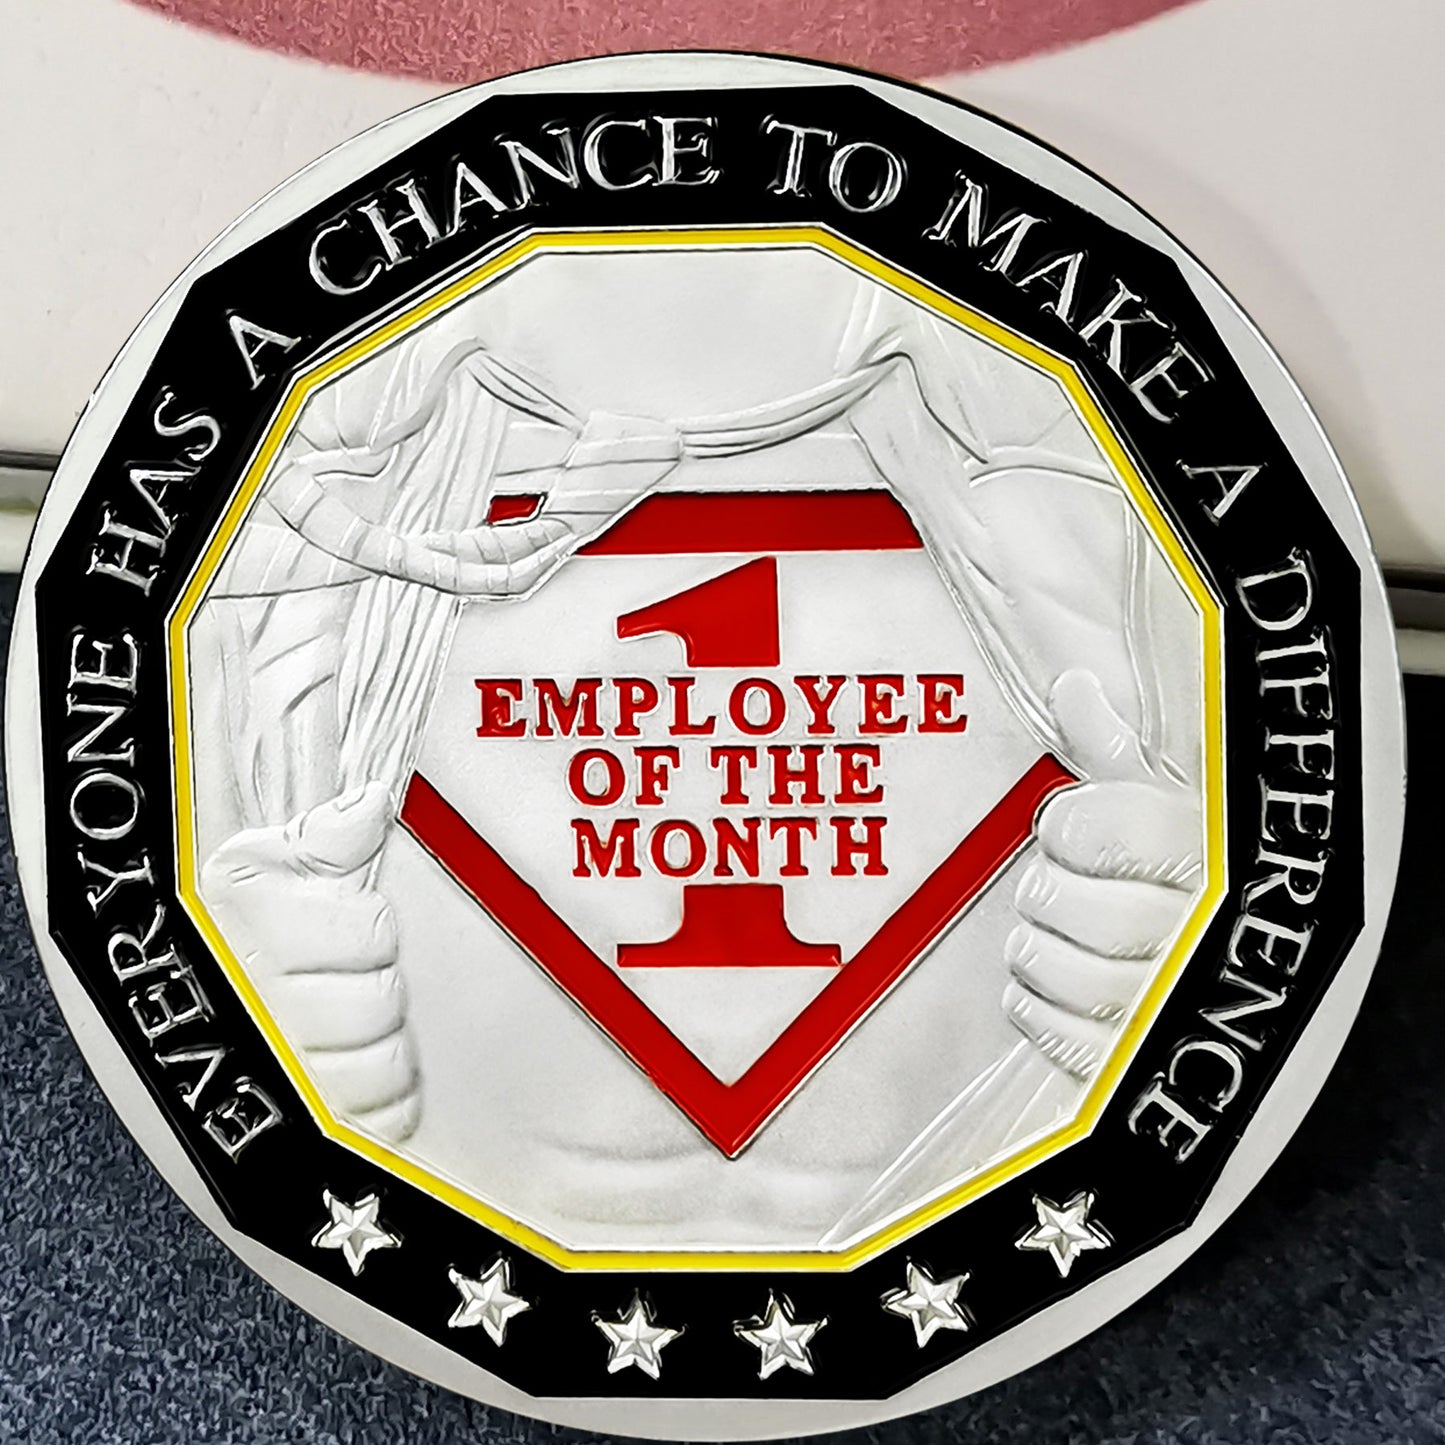 Encouragement Challenge Coin-employee Appreciation Gifts Inspirational Thank You Coin for Students and Cowokers-Star of the Month